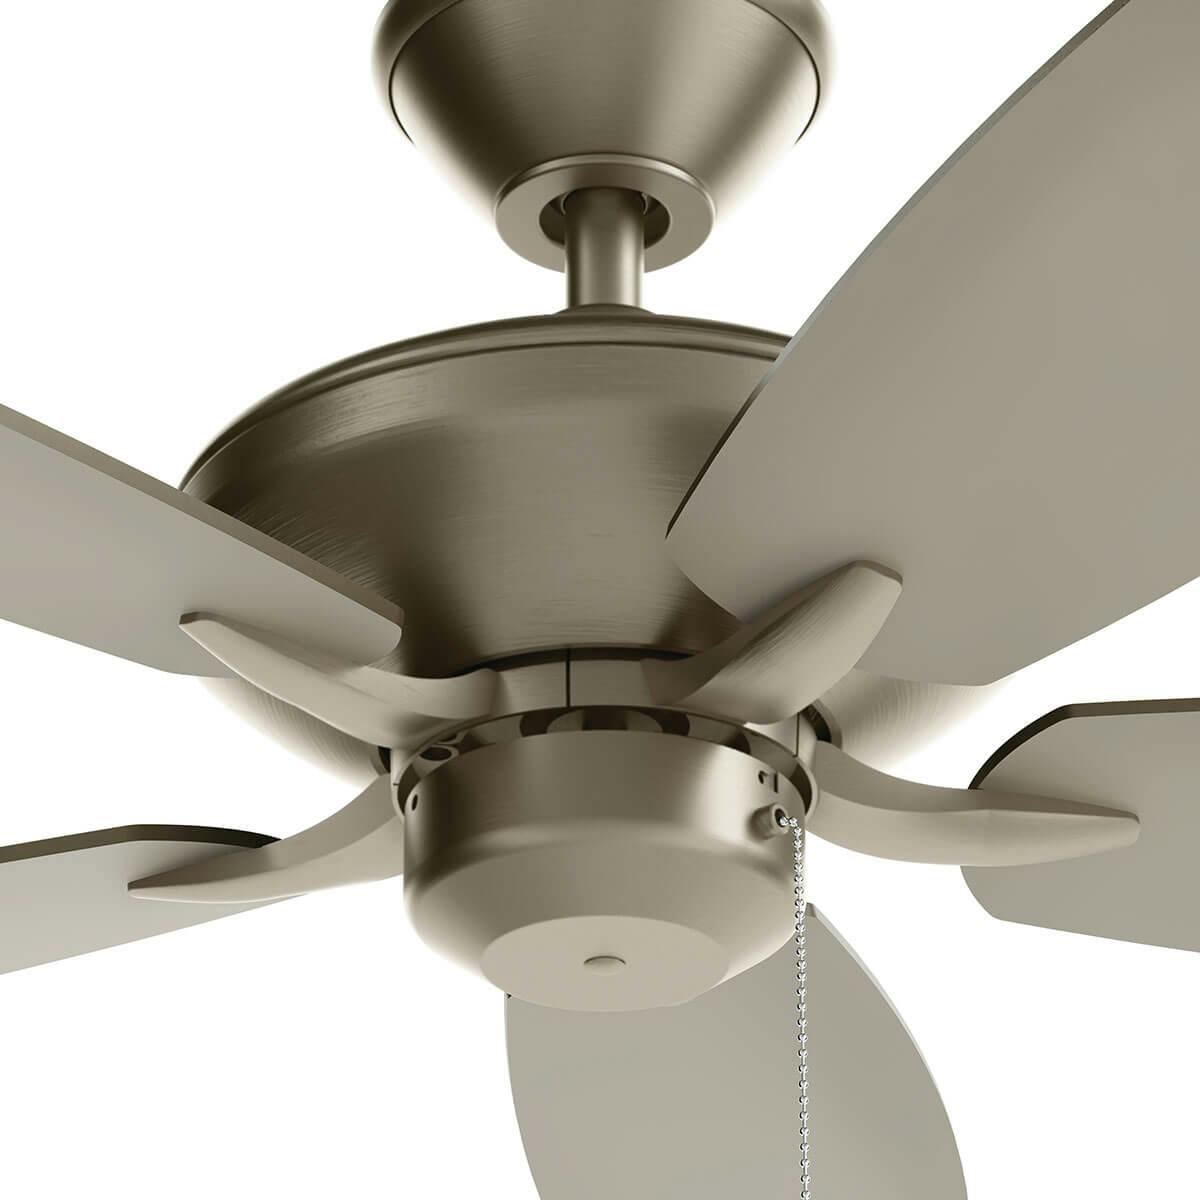 Product Image of ceiling fan 330165NI